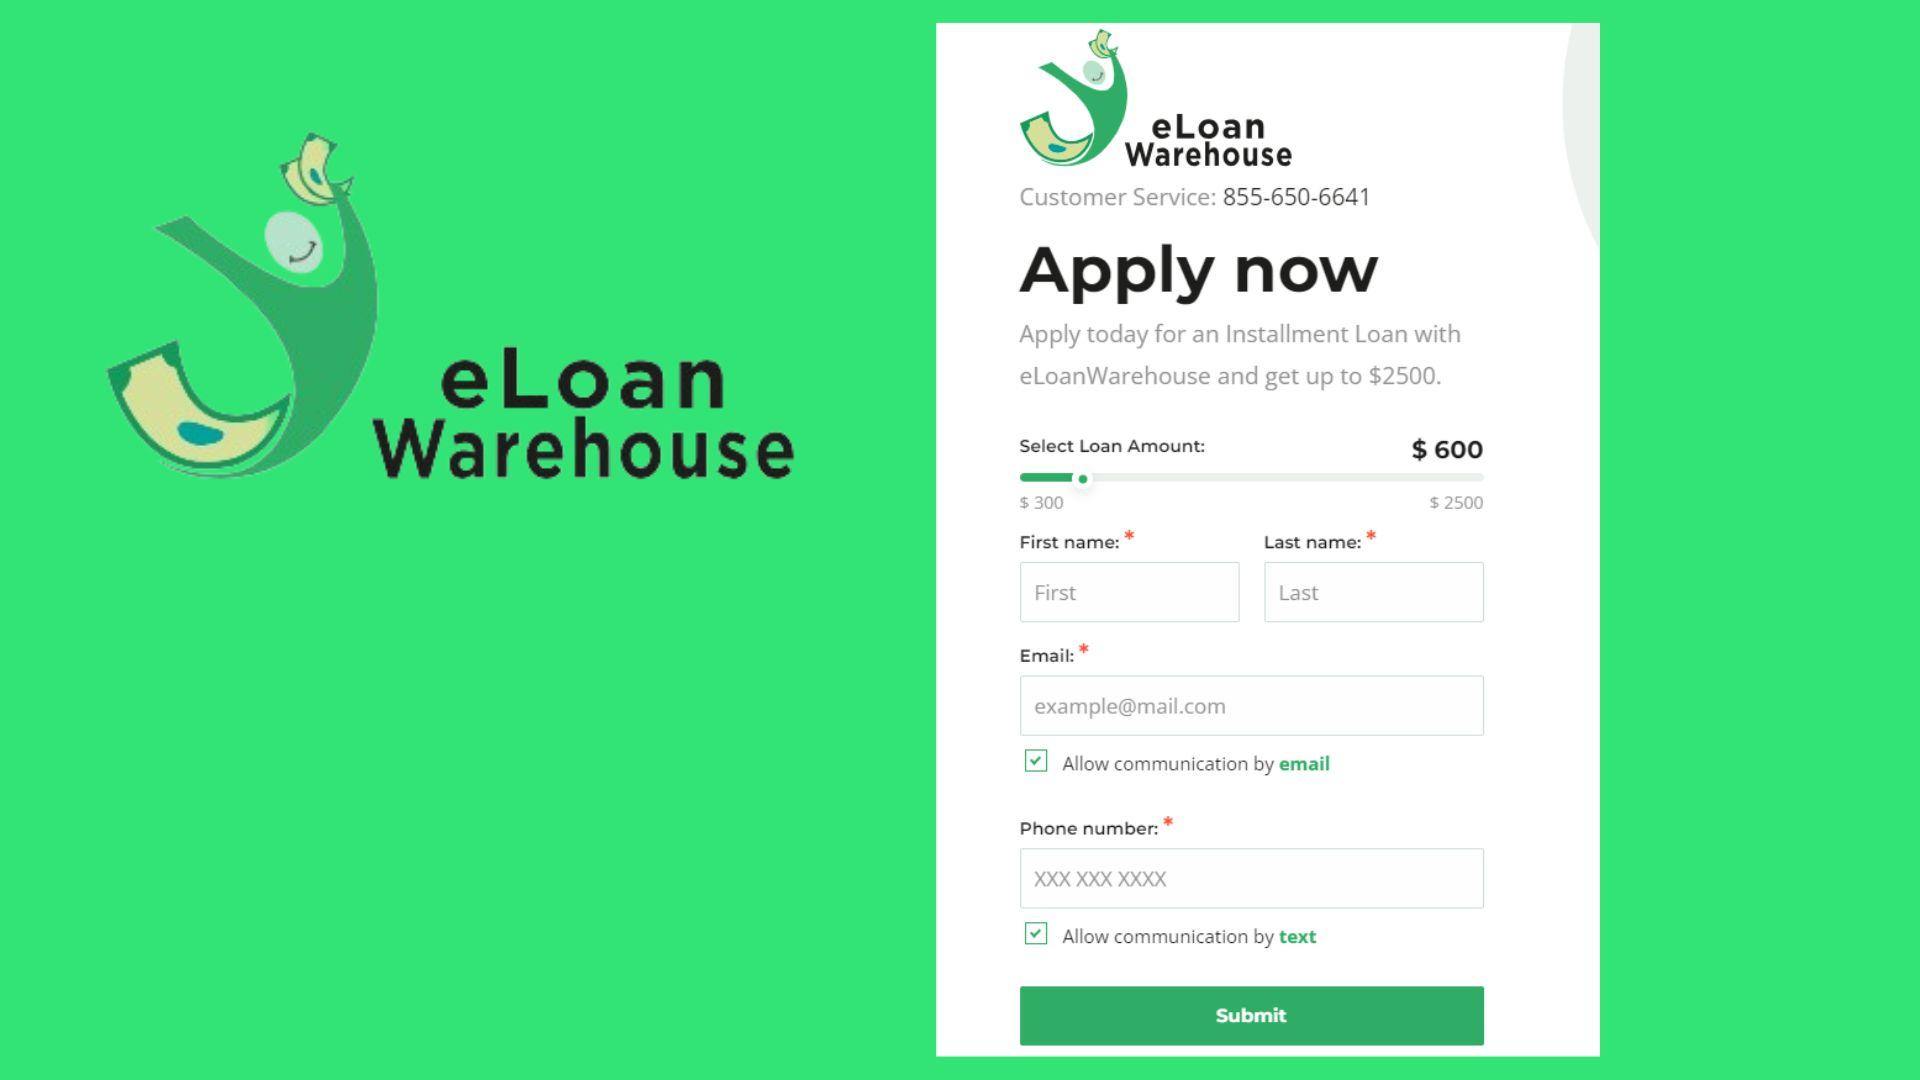 How to apply for a loan on eLoanWarehouse?